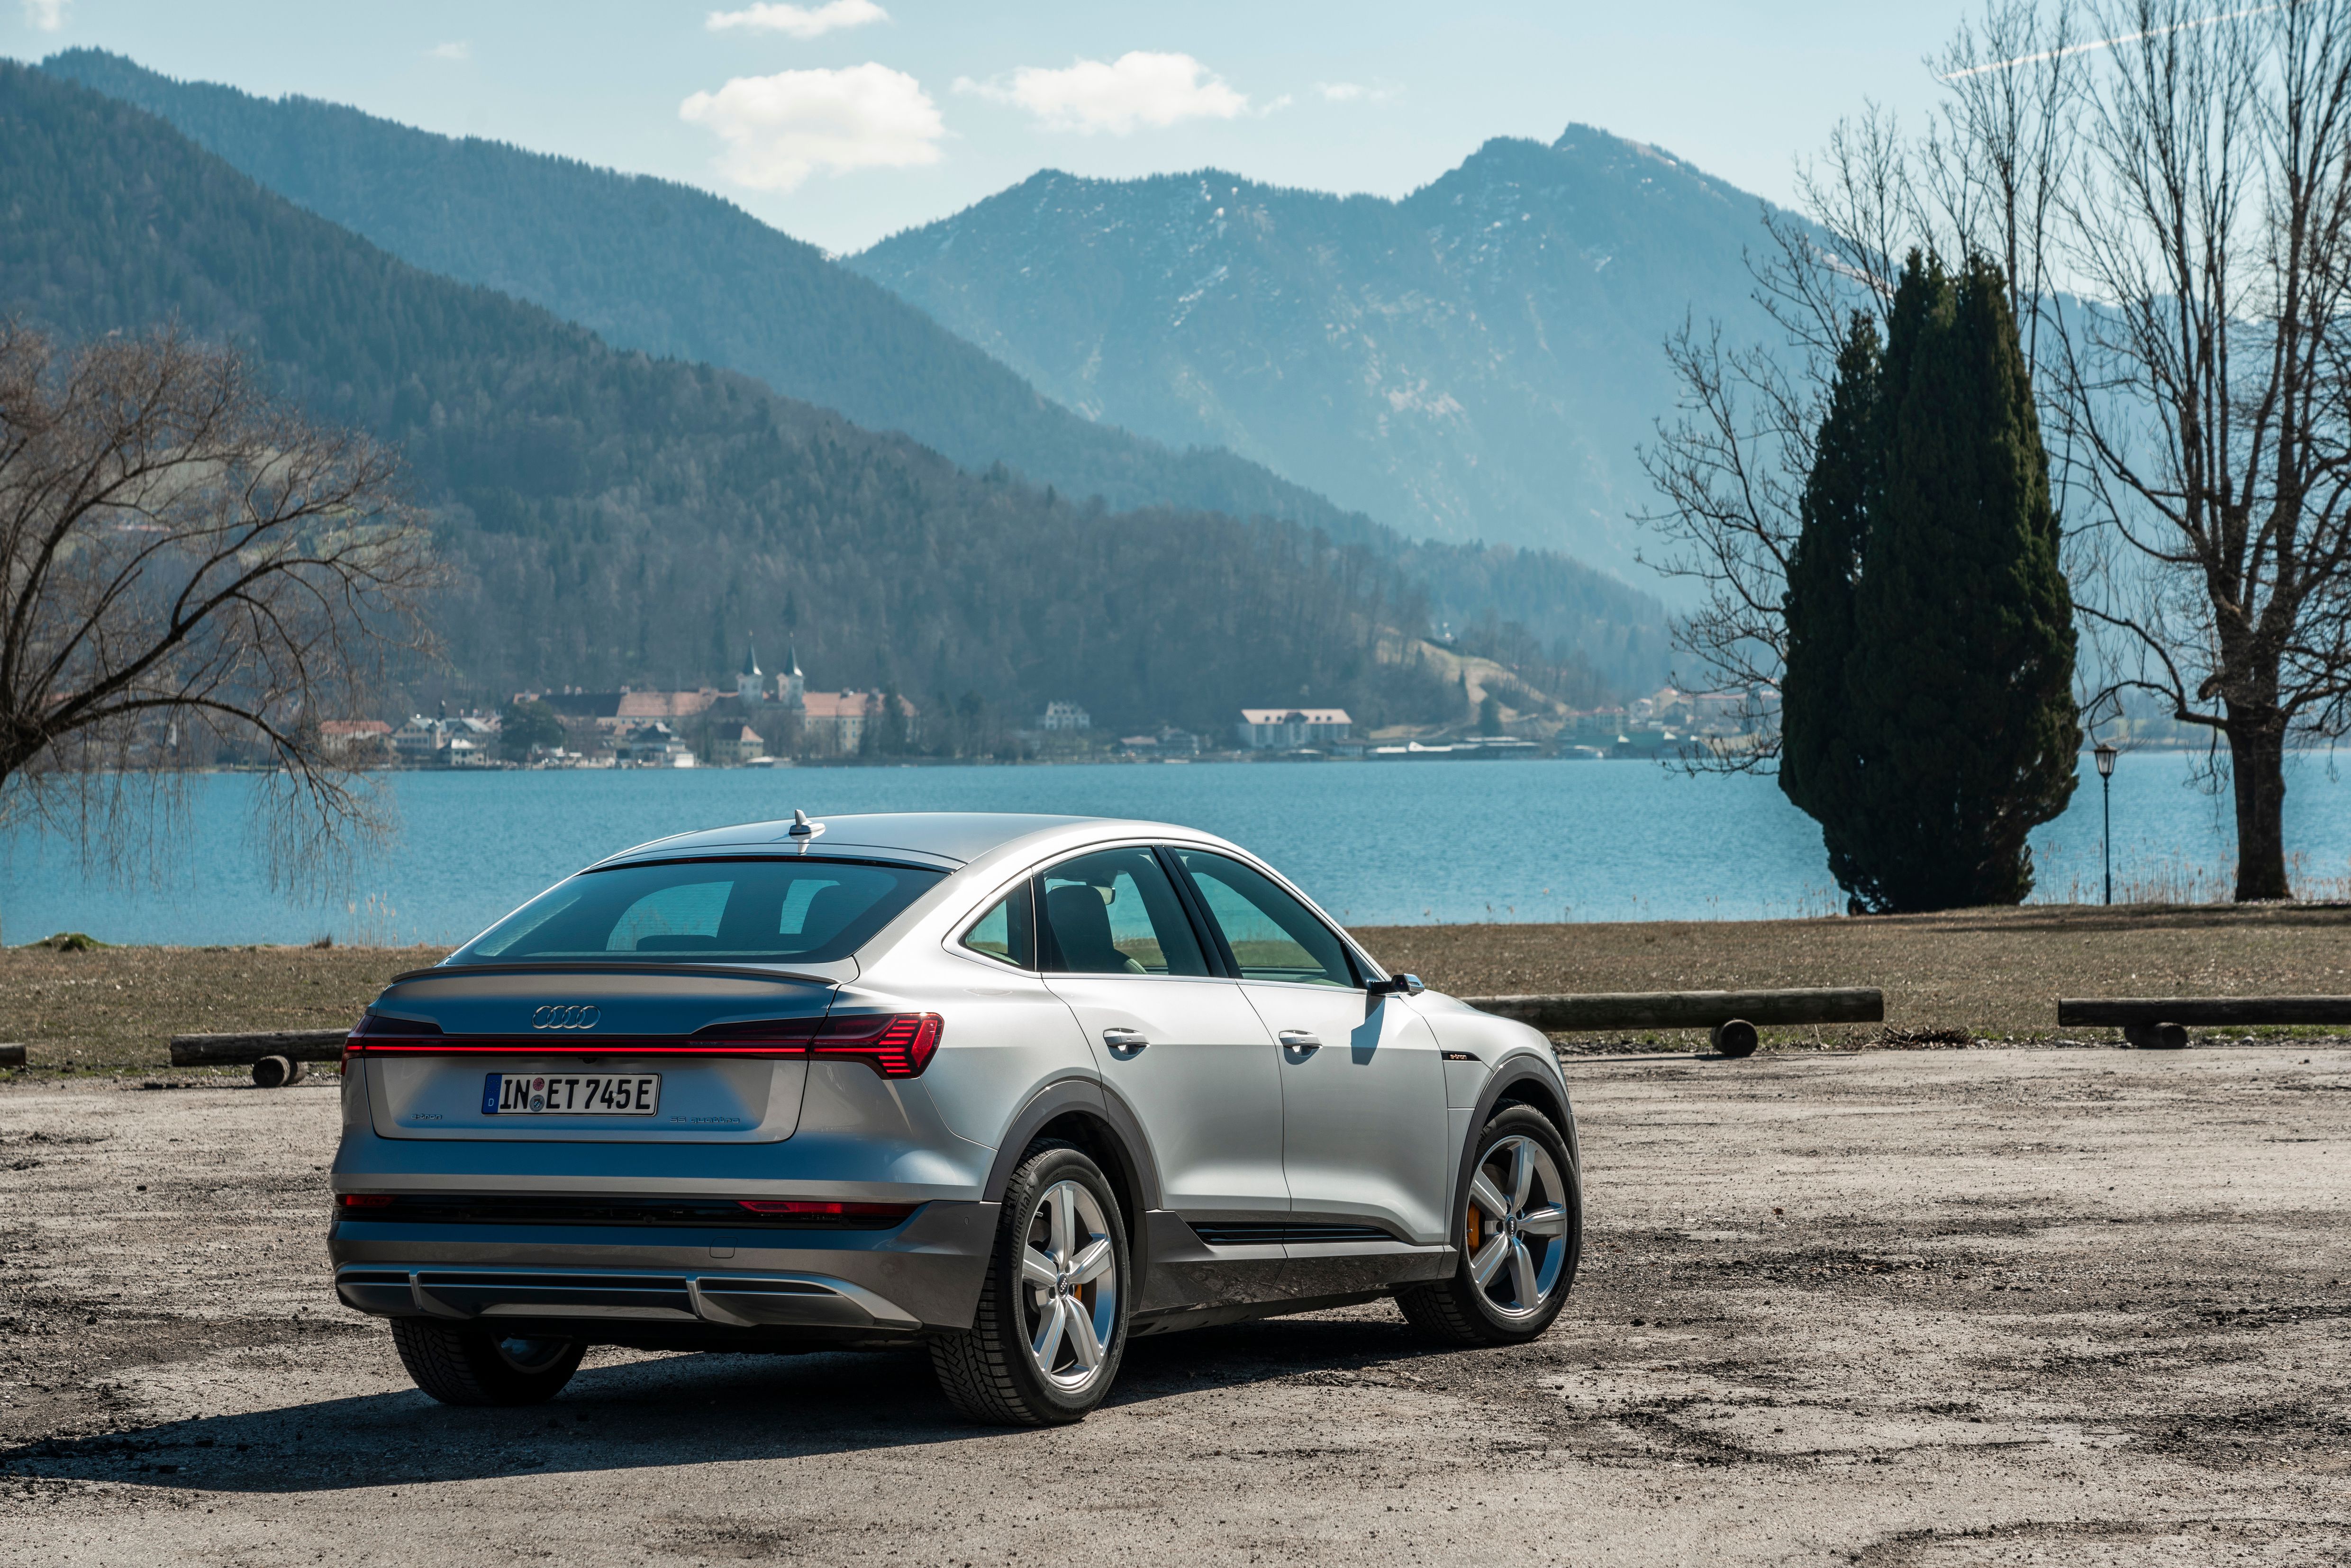 The rear of the new e-tron Sportback